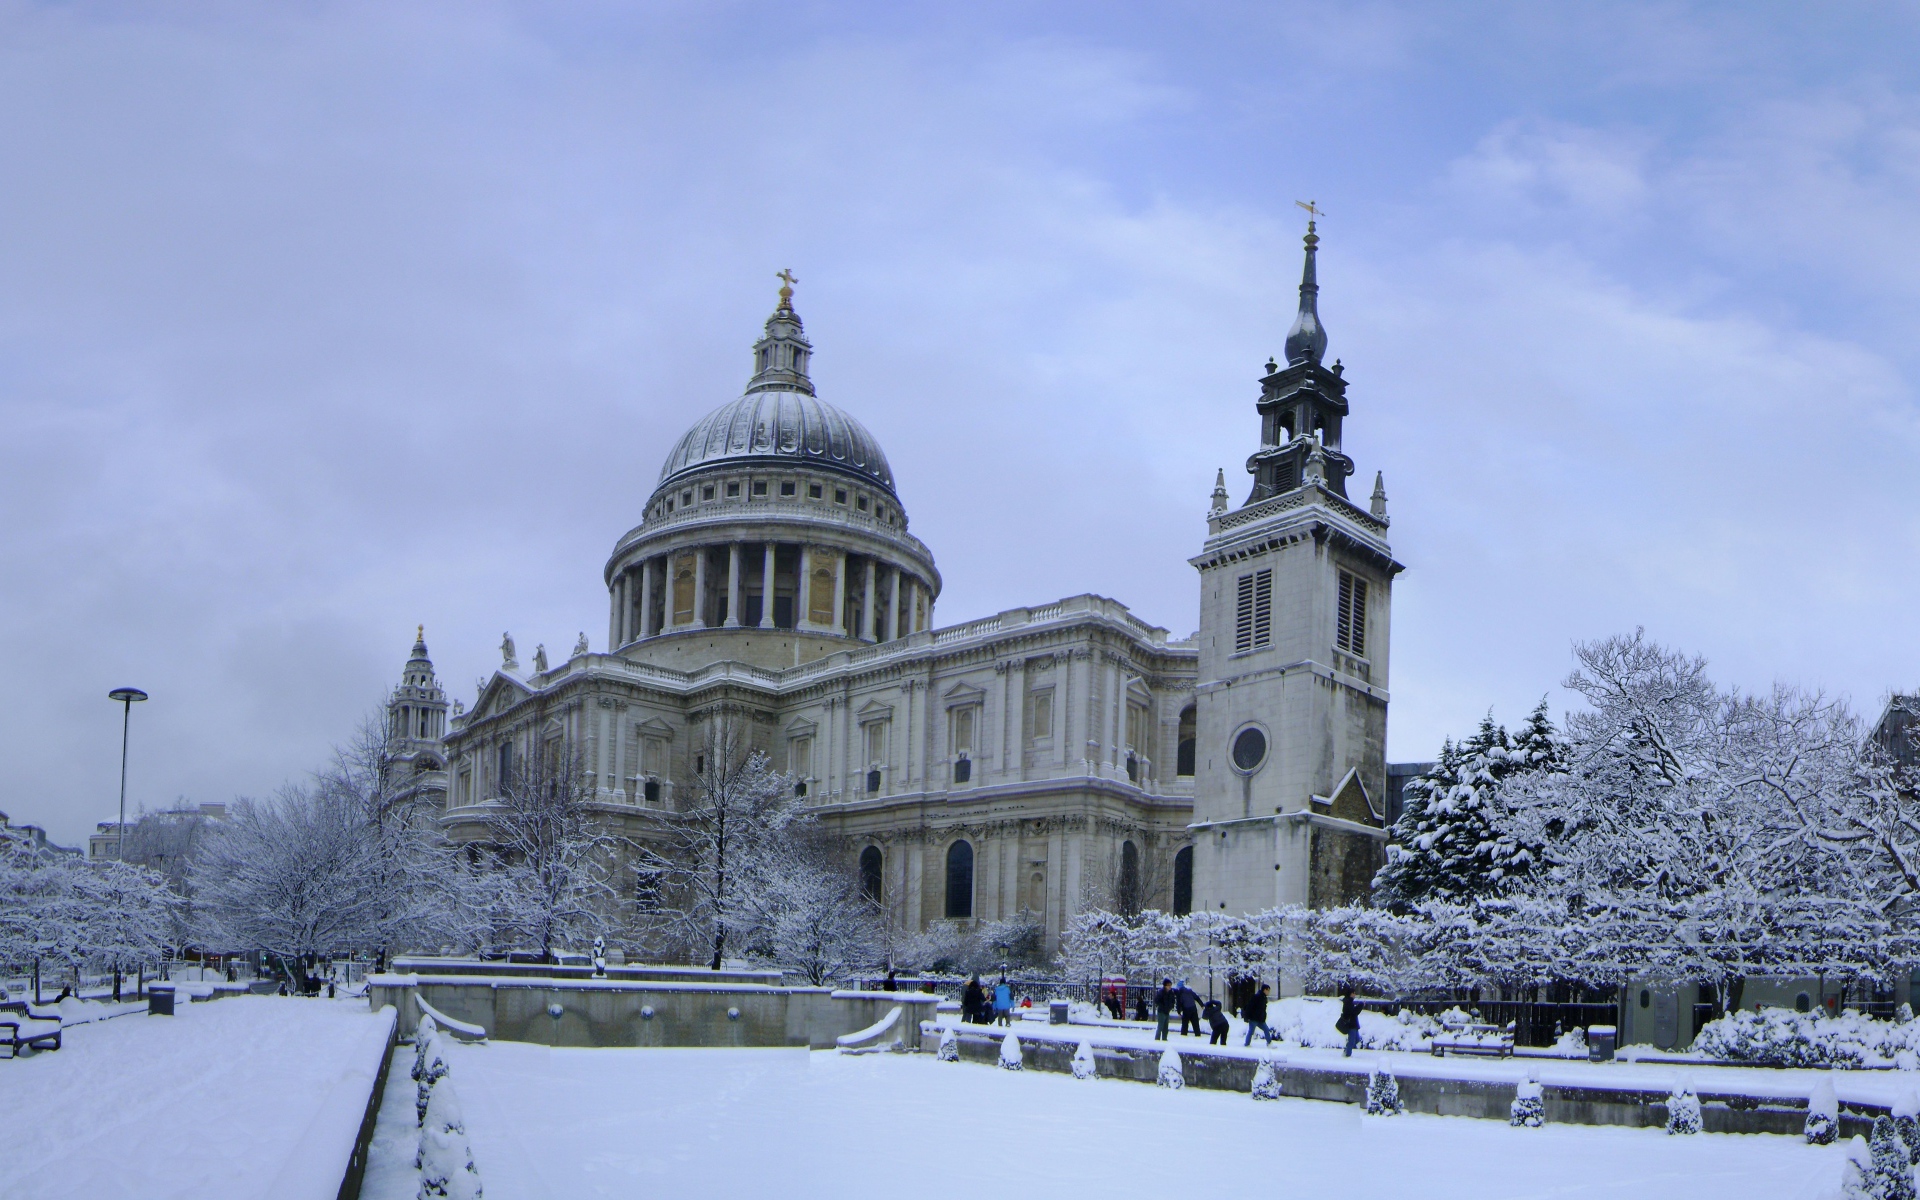 St. Paul's Cathedral in London in winter, England